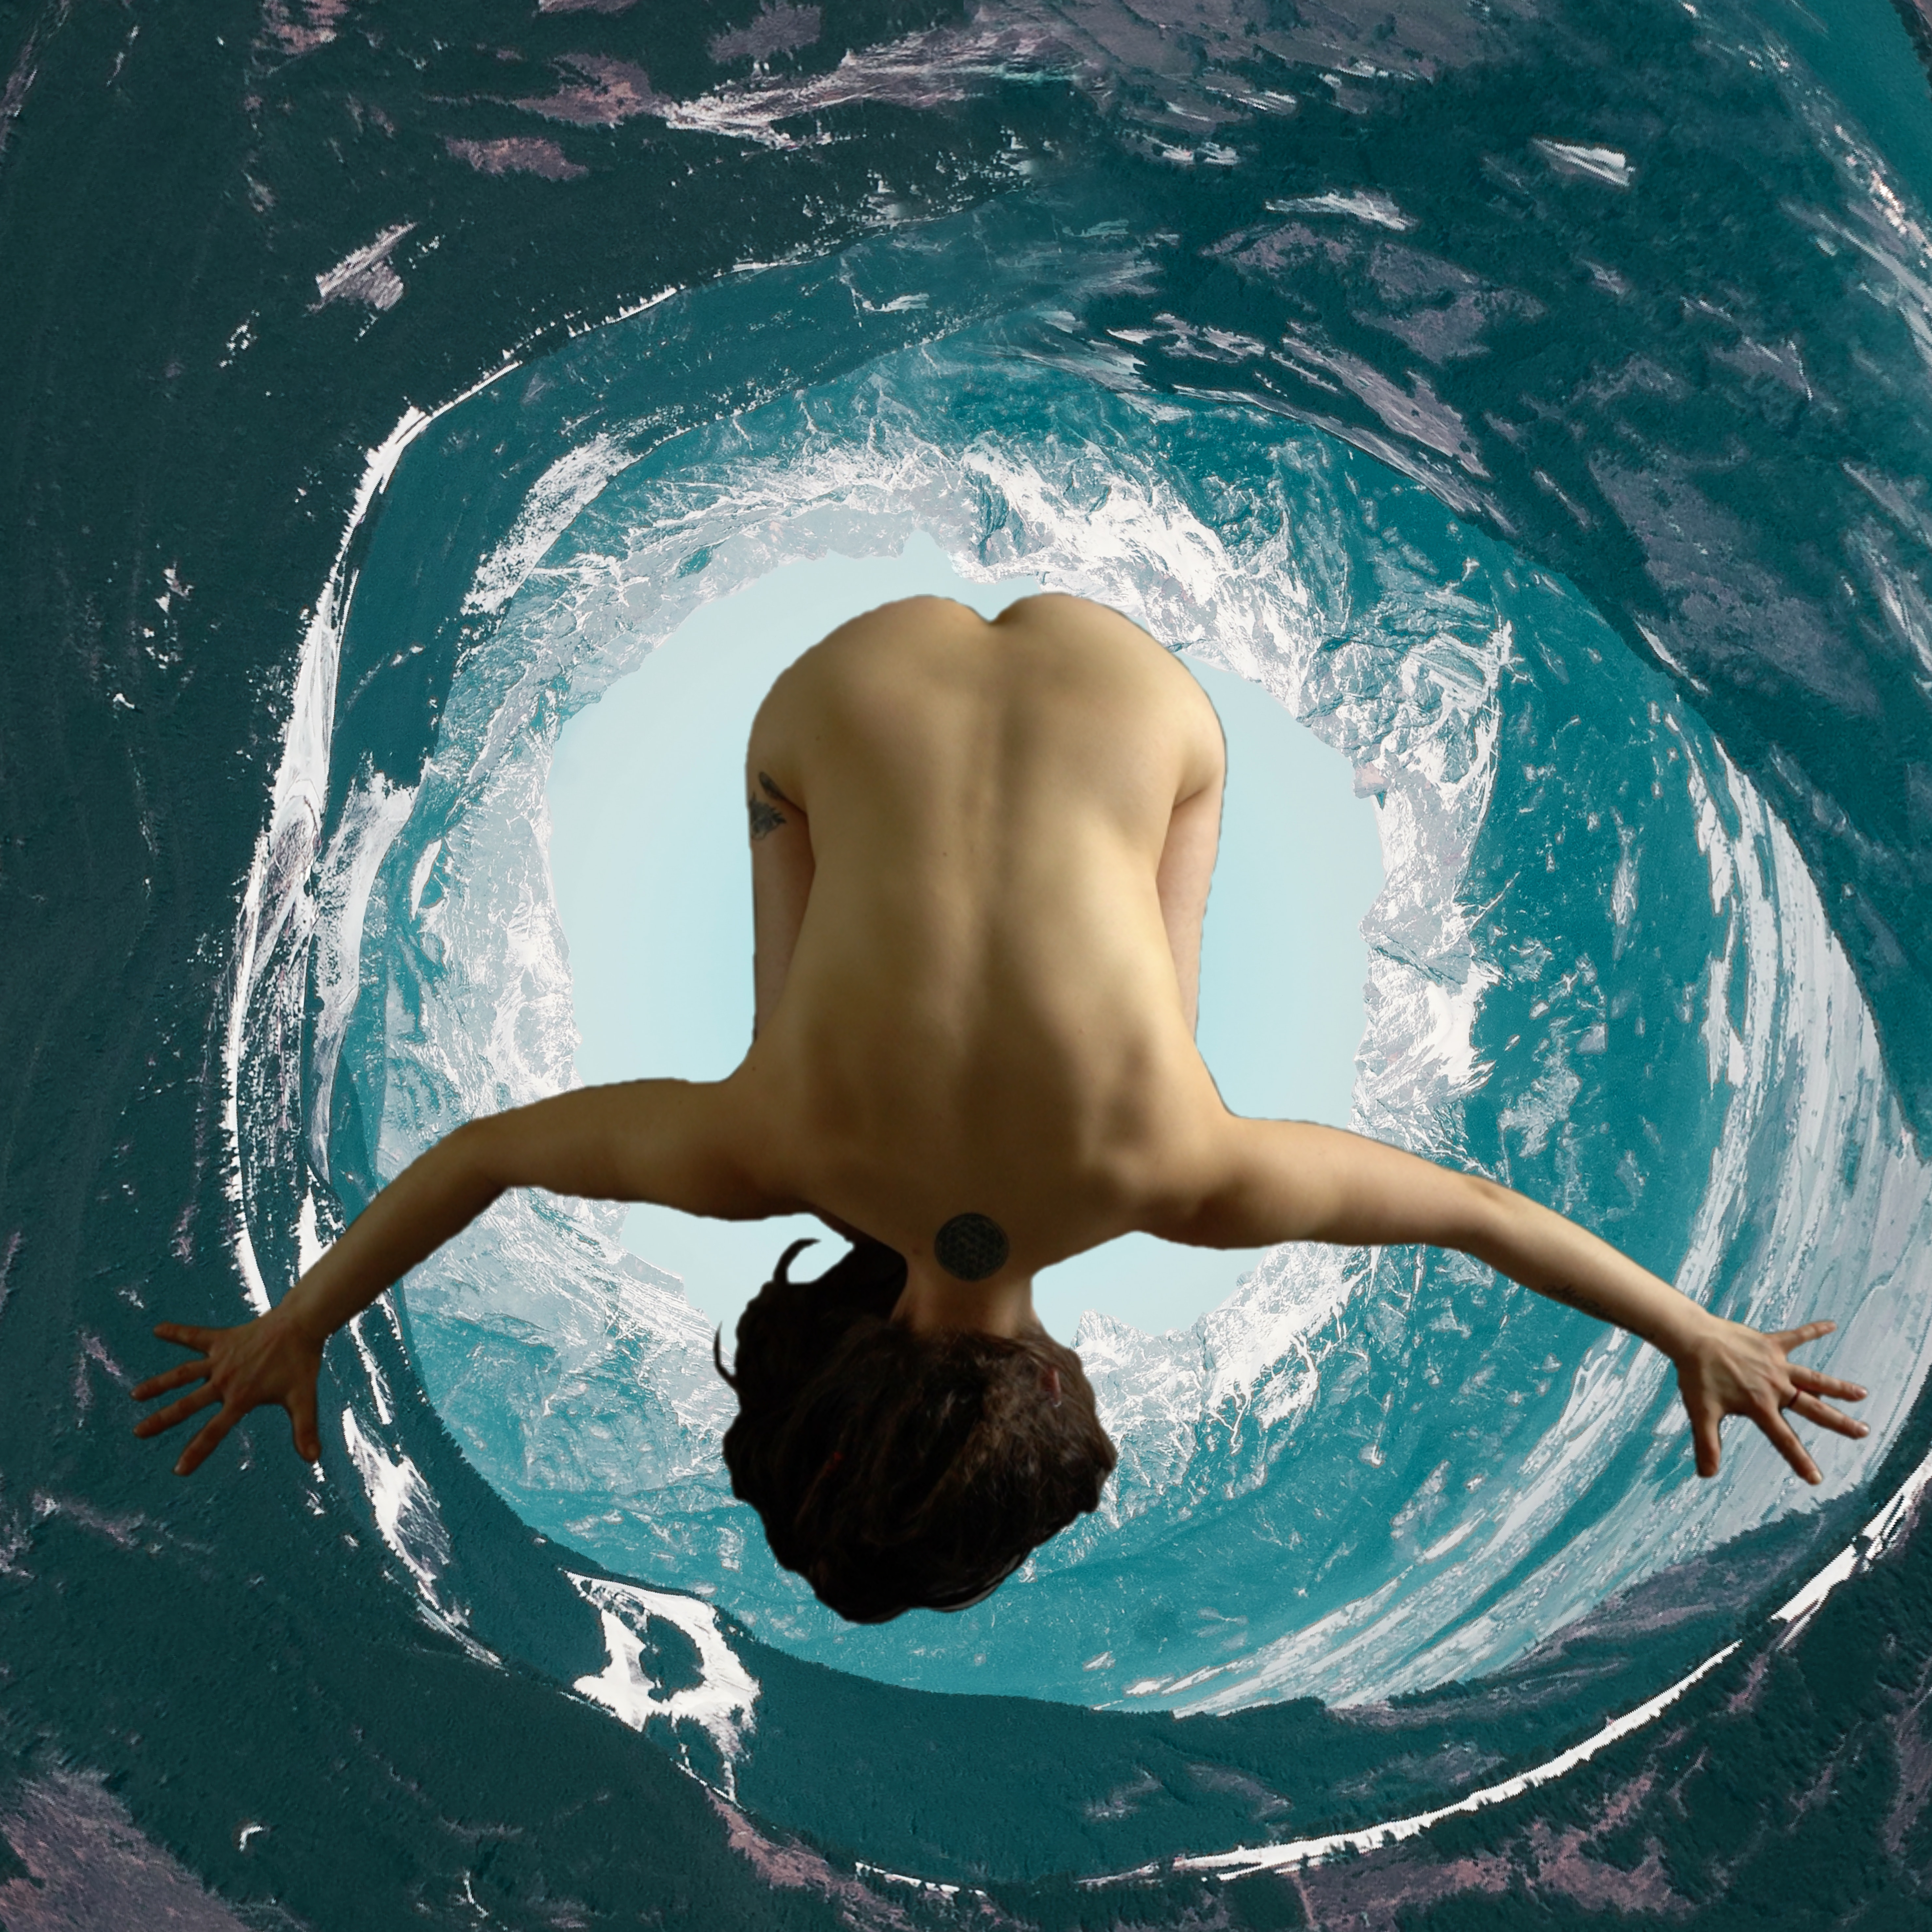 A photo collage depicting a nude person jumping into a water vortex with their arms spread, viewed from above.